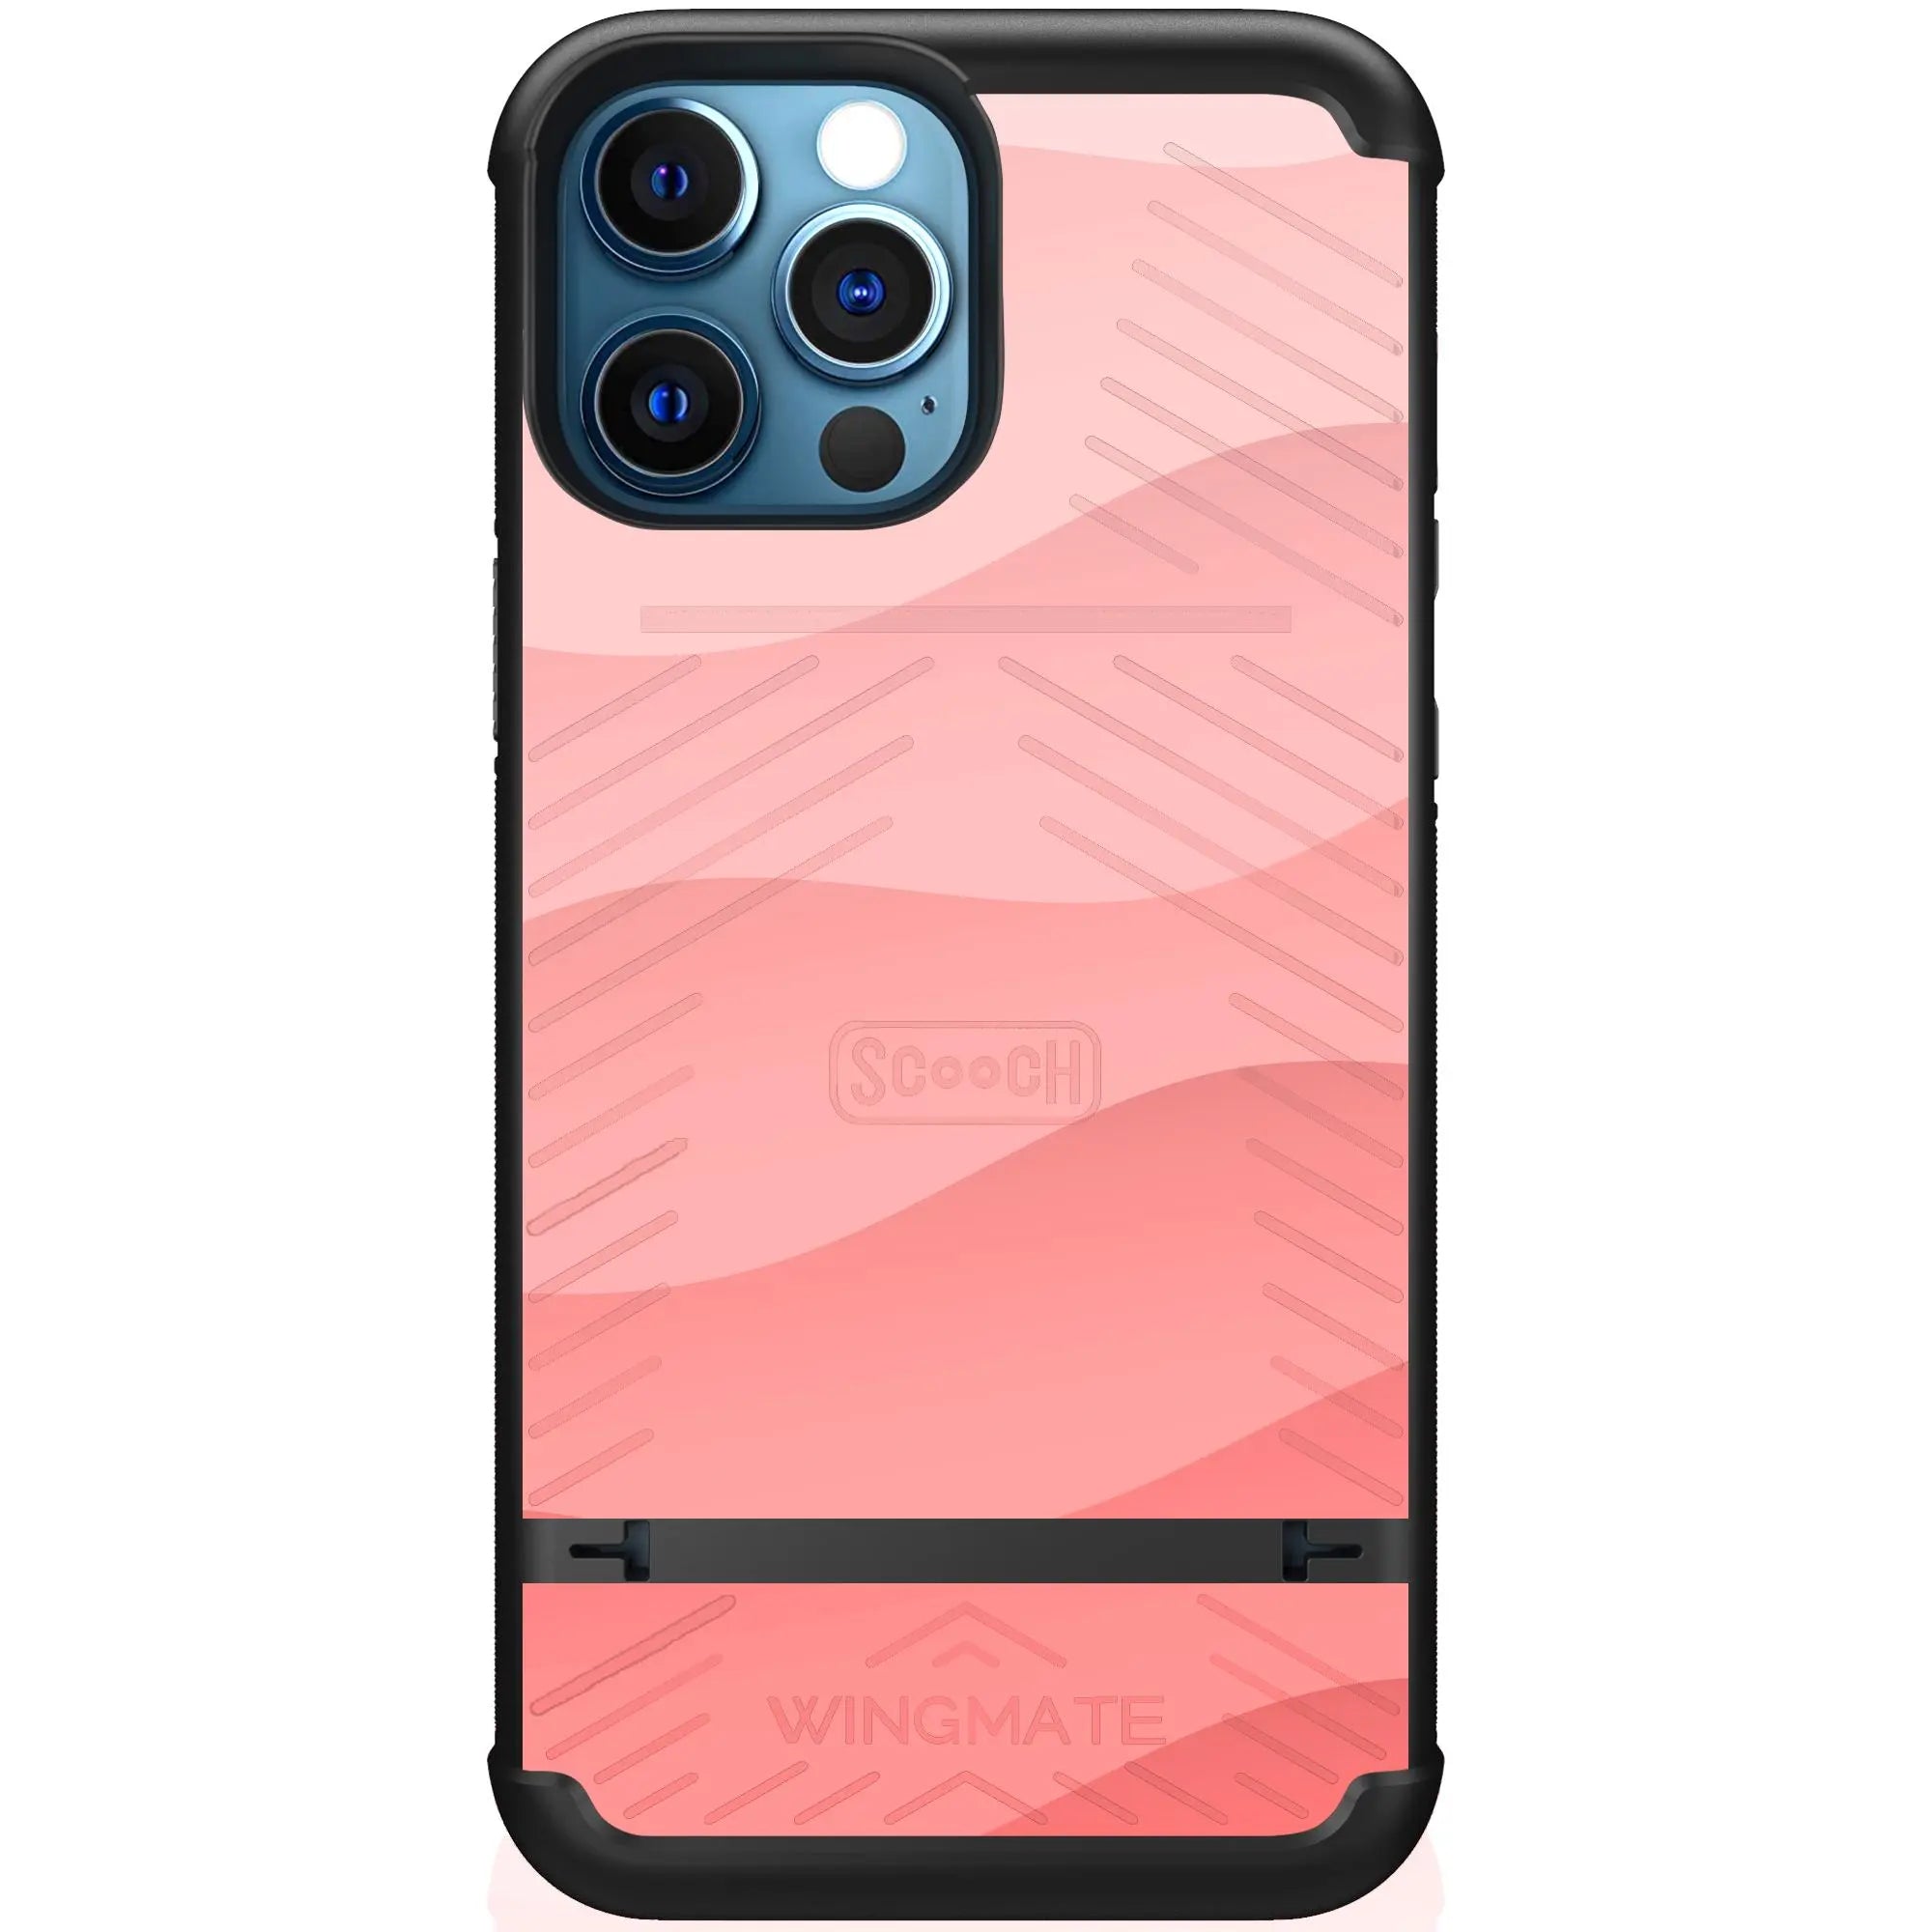 Scooch-Wingmate for iPhone 12 Pro-Pink-Waves